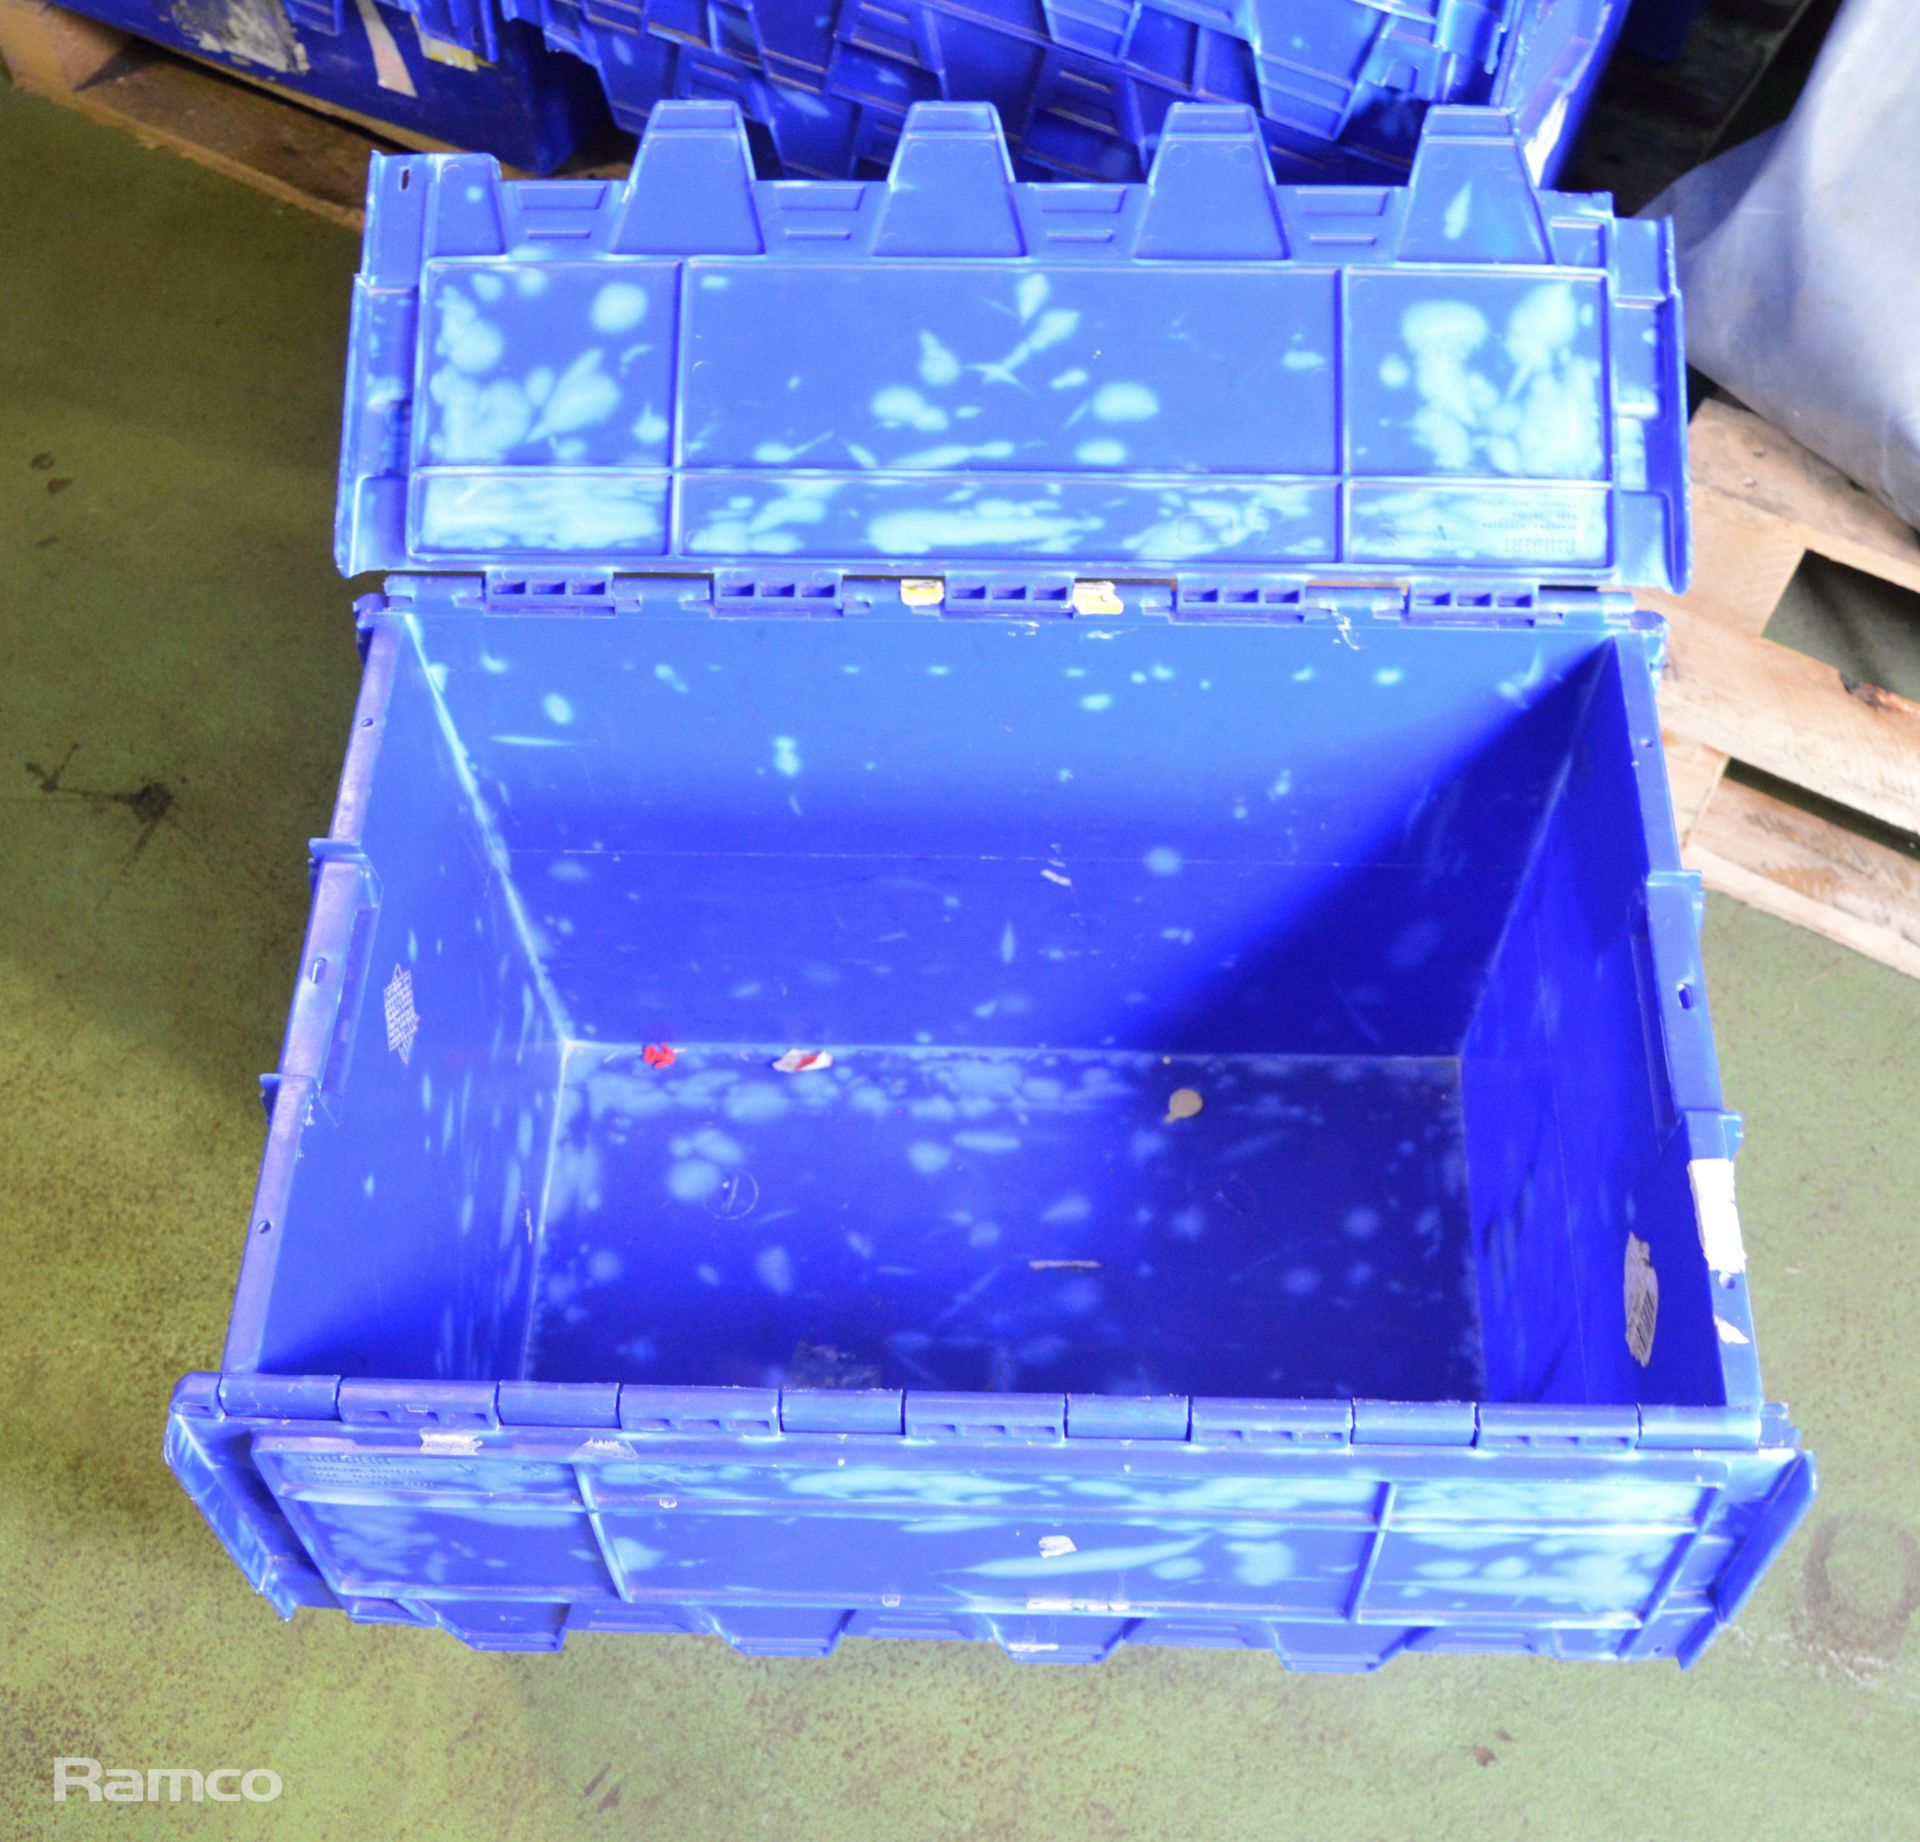 60x Plastic Tote Boxes With Attached Lid L 600mm x W 400mm x H 350mm - Image 3 of 3